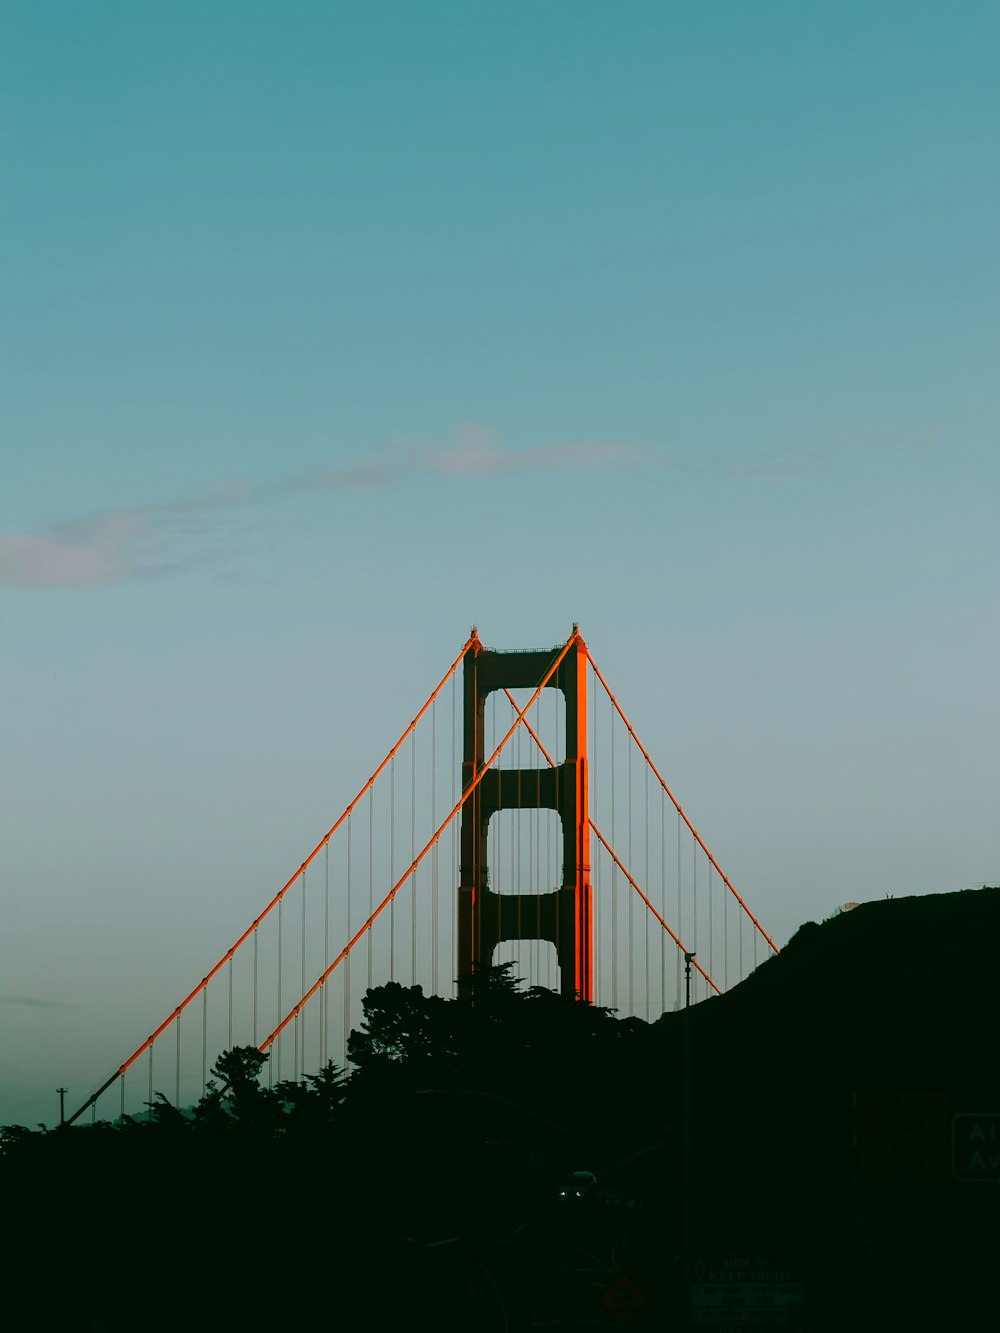 the golden gate bridge is silhouetted against a blue sky